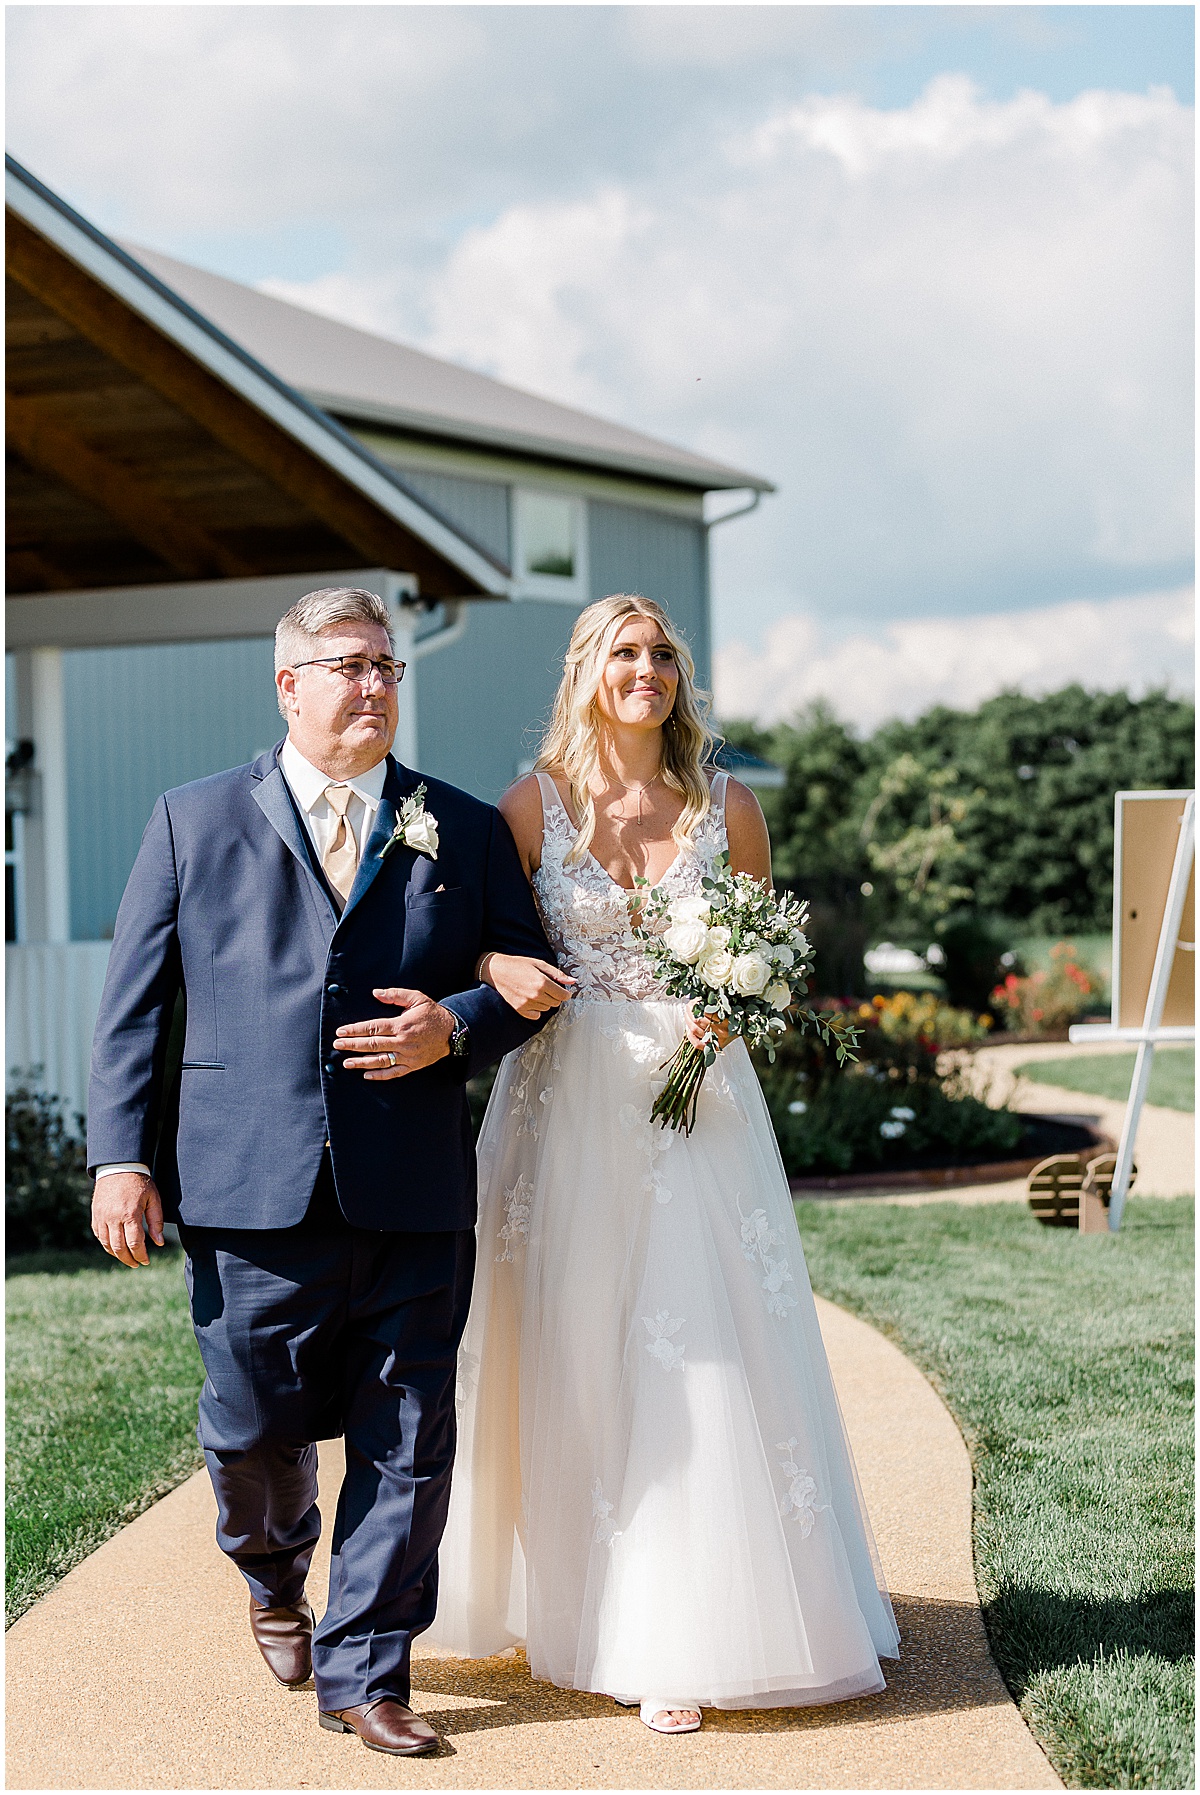 Haley and Dalen’s New Journey Farms wedding in Lafayette, IN photographed by the Kaitlin Mendoza Photography associate team.